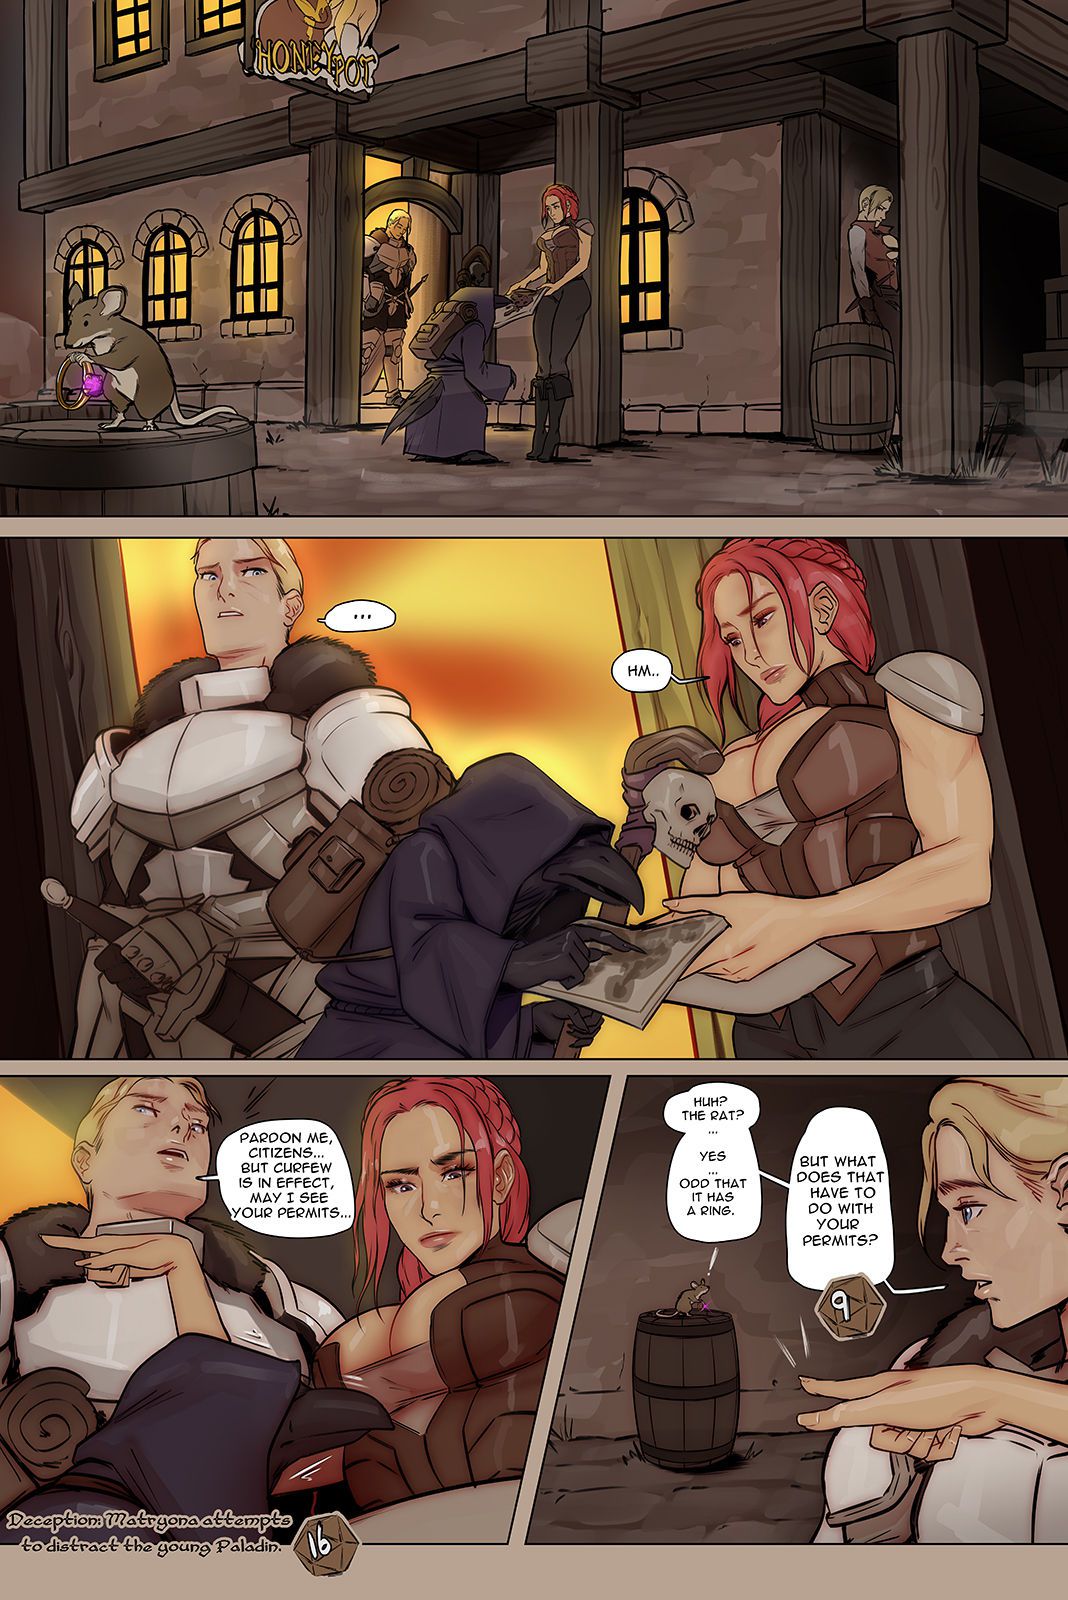 [cherry-gig] Tavern Sluts / Honeypot (ongoing) (Dungeons & Dragons) (ongoing) [English] 31